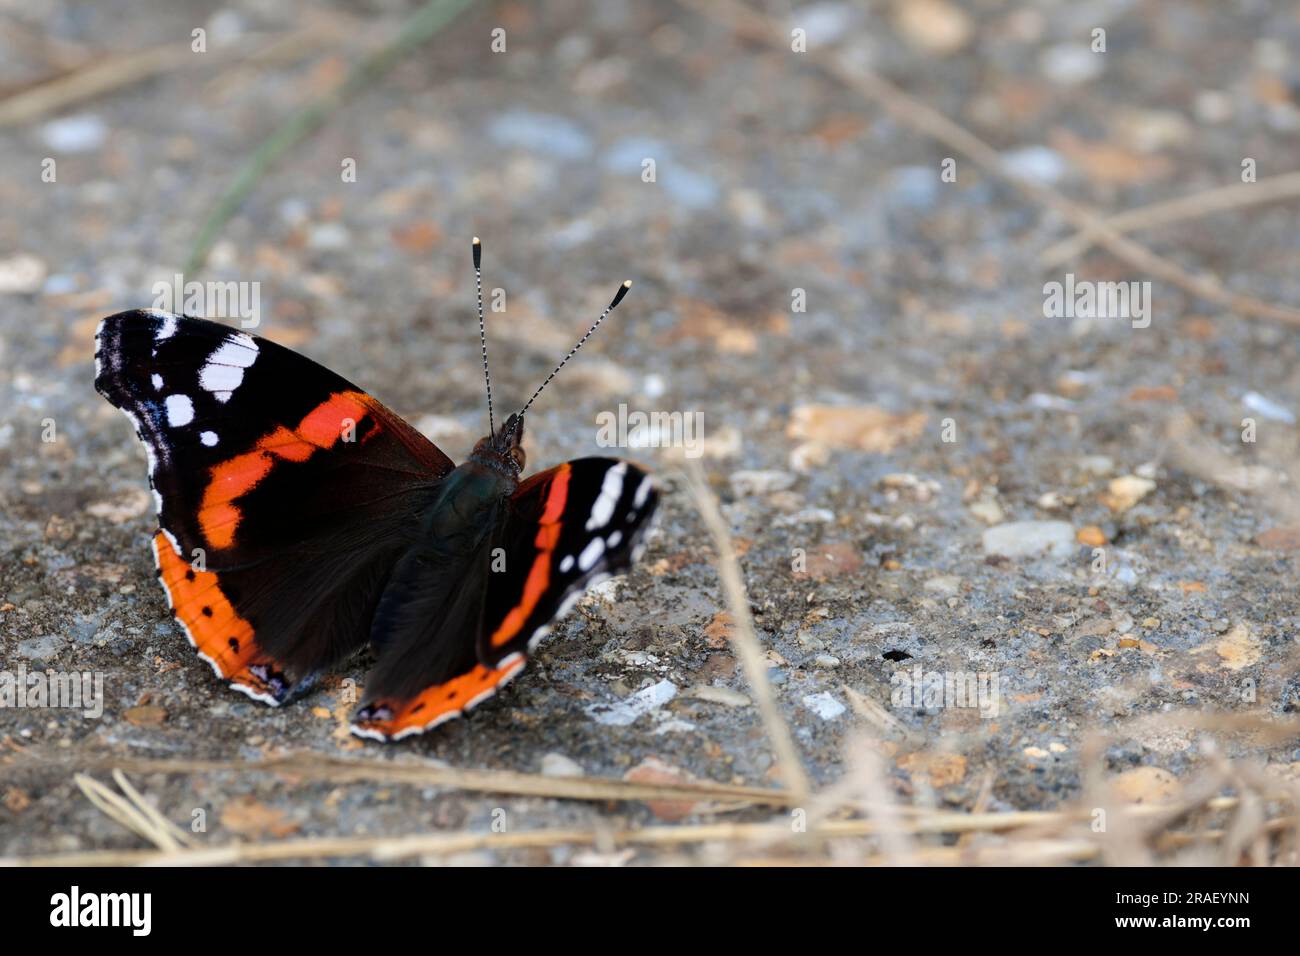 Red admiral butterfly Vannesa atalanta, upperwings black with red bands and white spots underwings marbled smoky grey 60mm sunbathing summer season uk Stock Photo